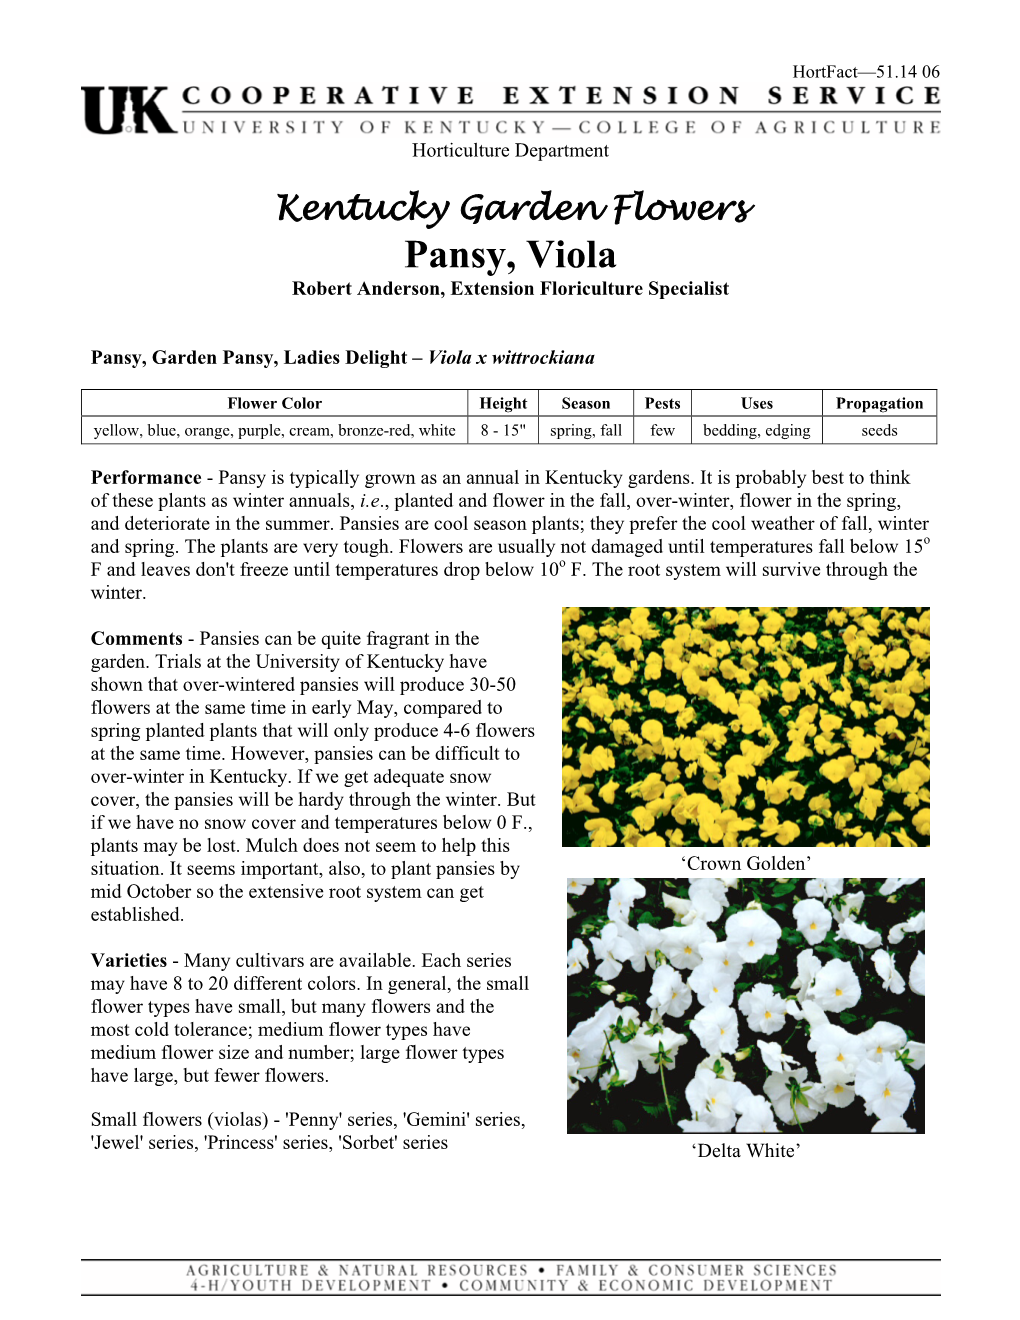 Pansy, Viola Robert Anderson, Extension Floriculture Specialist